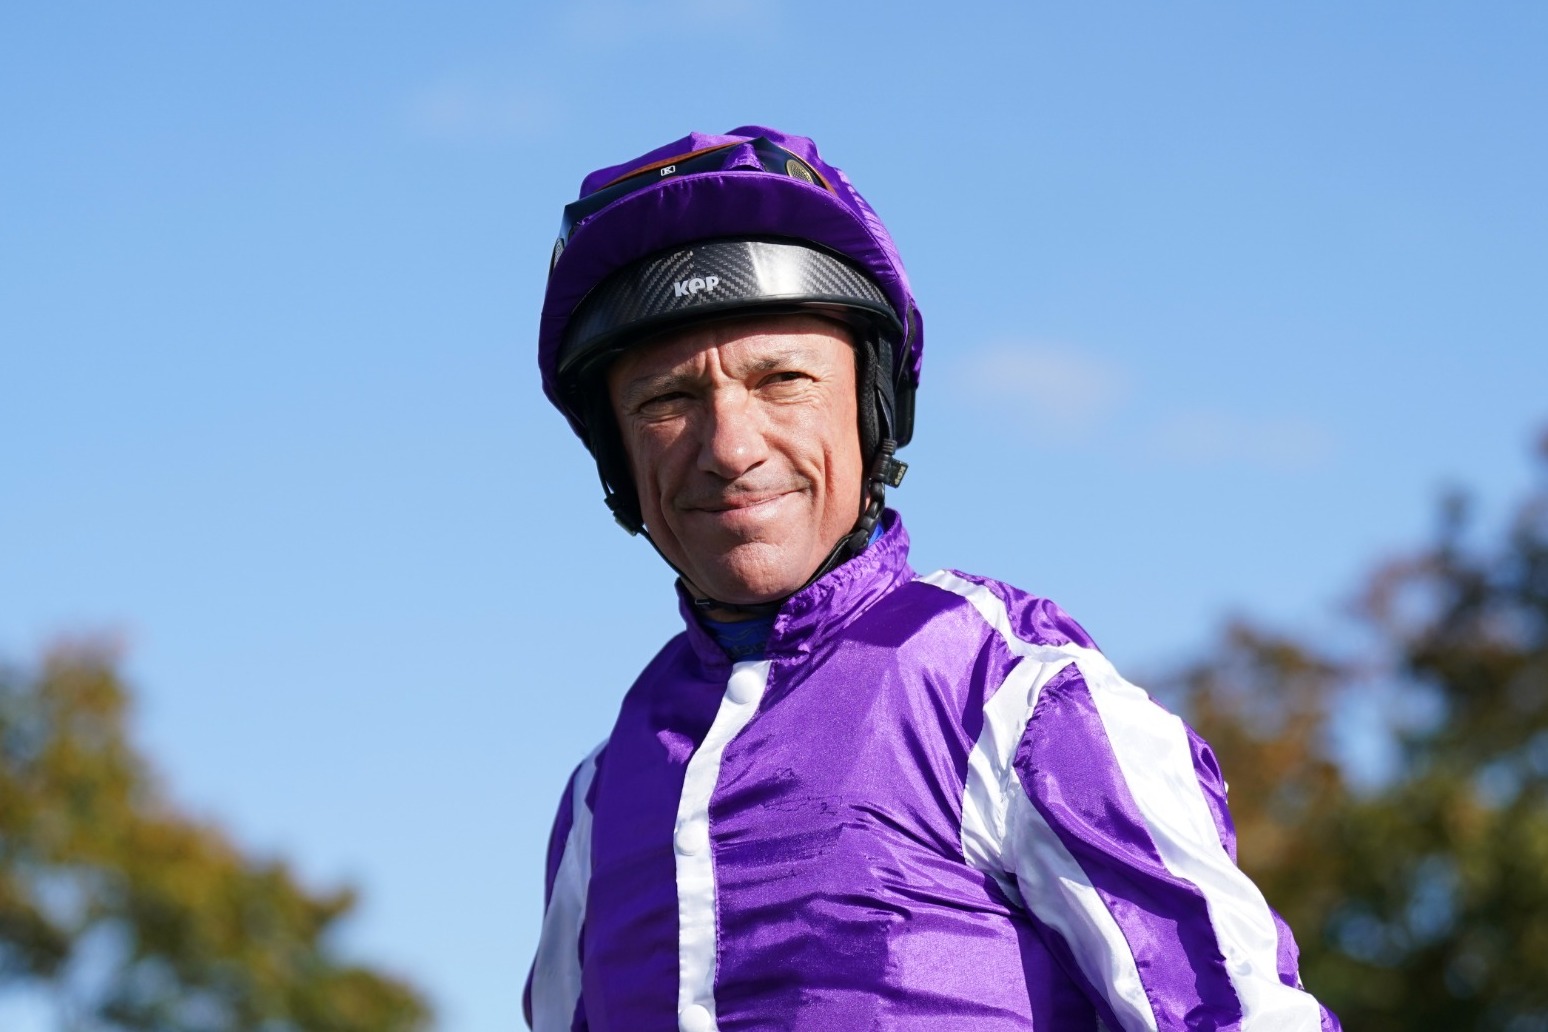 Frankie Dettori has won the Long Distance Cup on Trawlerman at Ascot, his first ride on the final day of his career in Britain. 